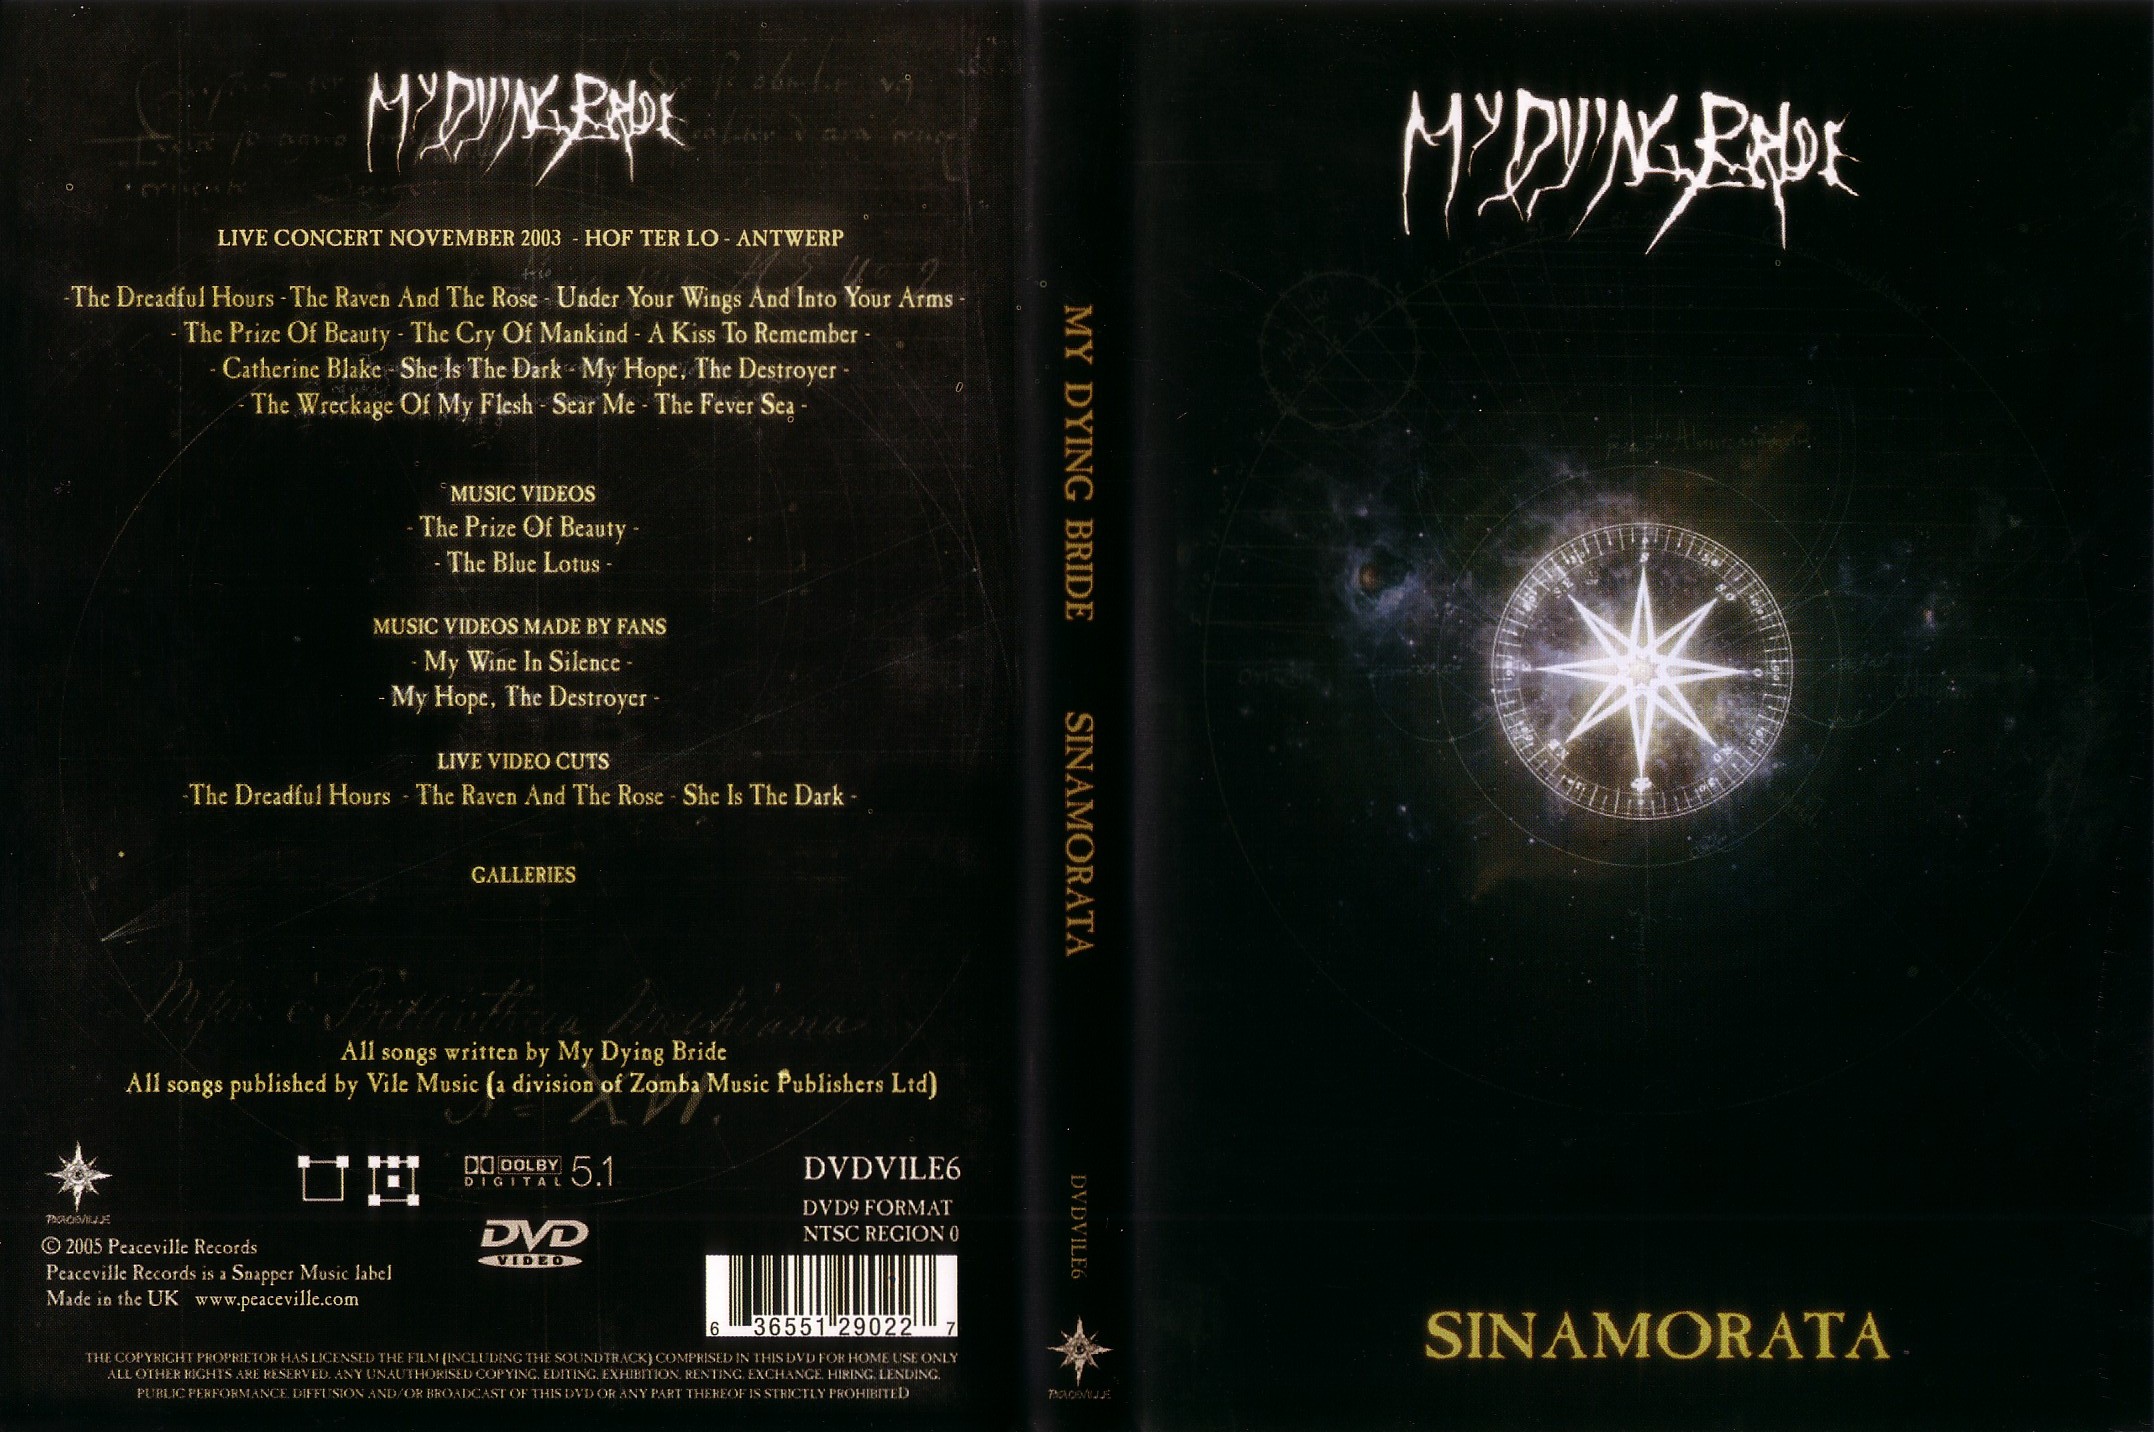 Jaquette DVD My dying bride sinamorata